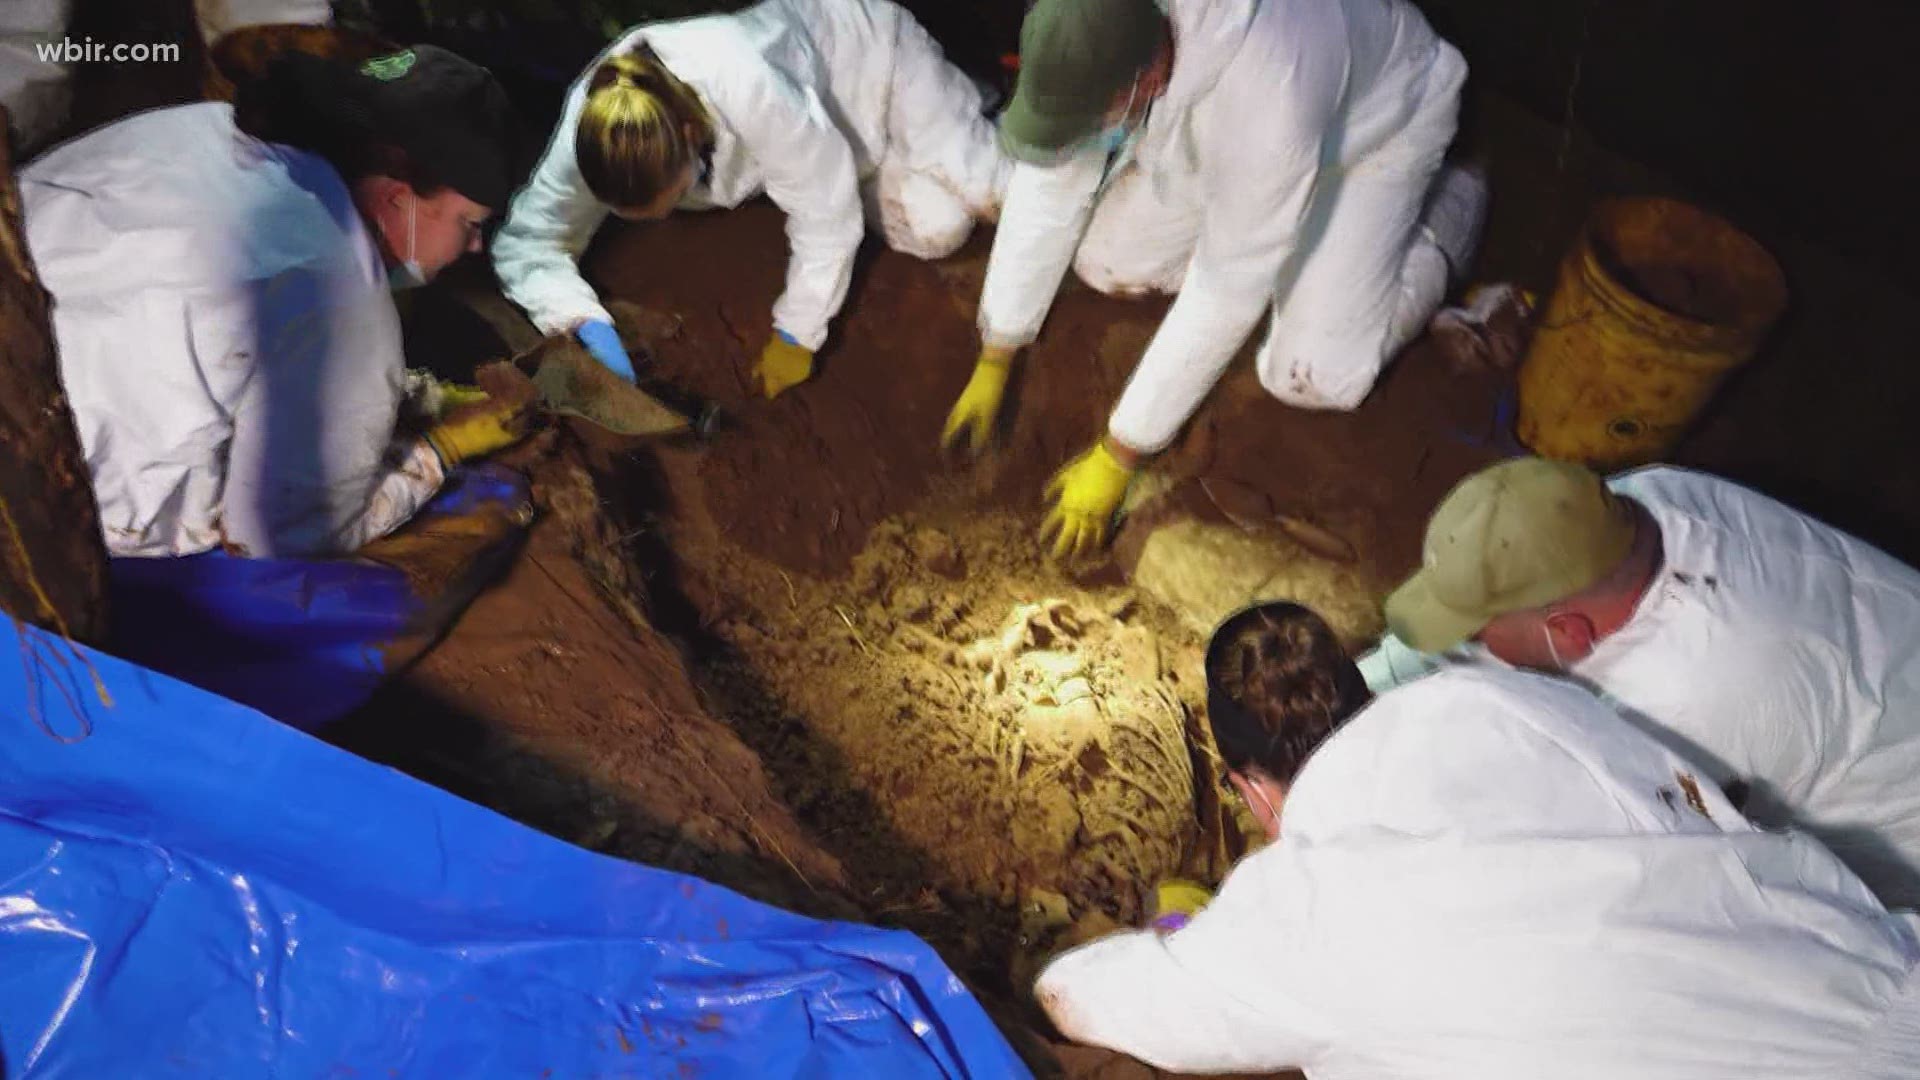 What these forensic anthropology experts do is one-of-a-kind, and they clearly aren't afraid to get their hands dirty to solve tough cases.